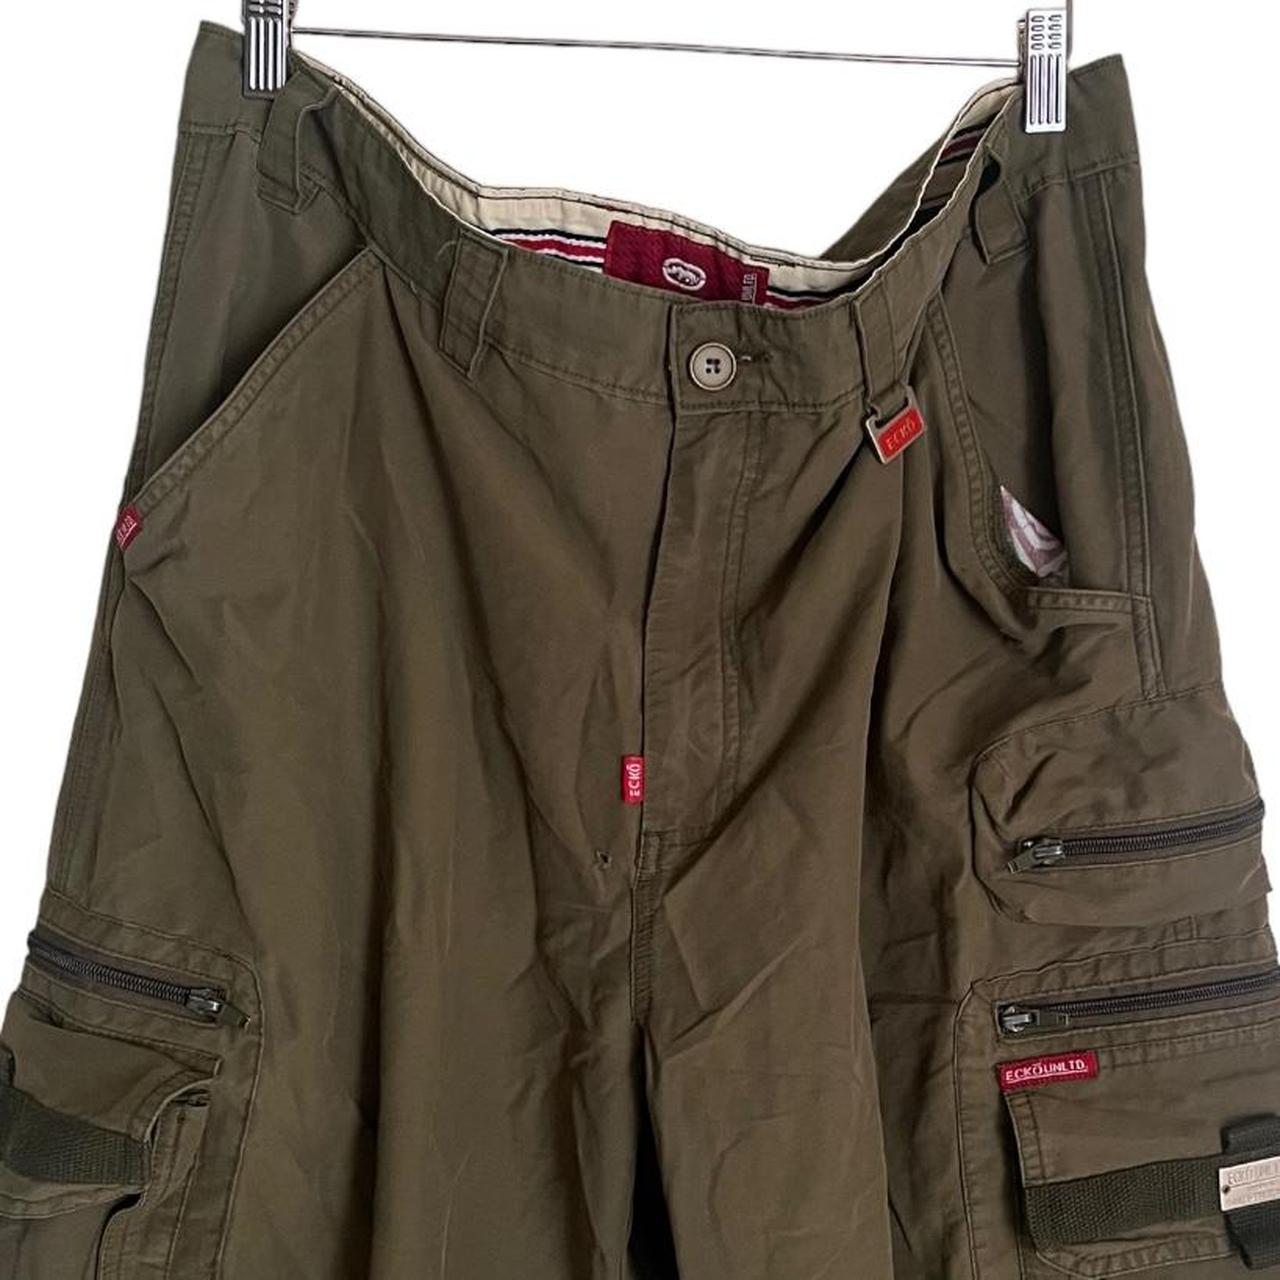 Vintage Baggy Cargo Pants from Ecko Unlimited in...